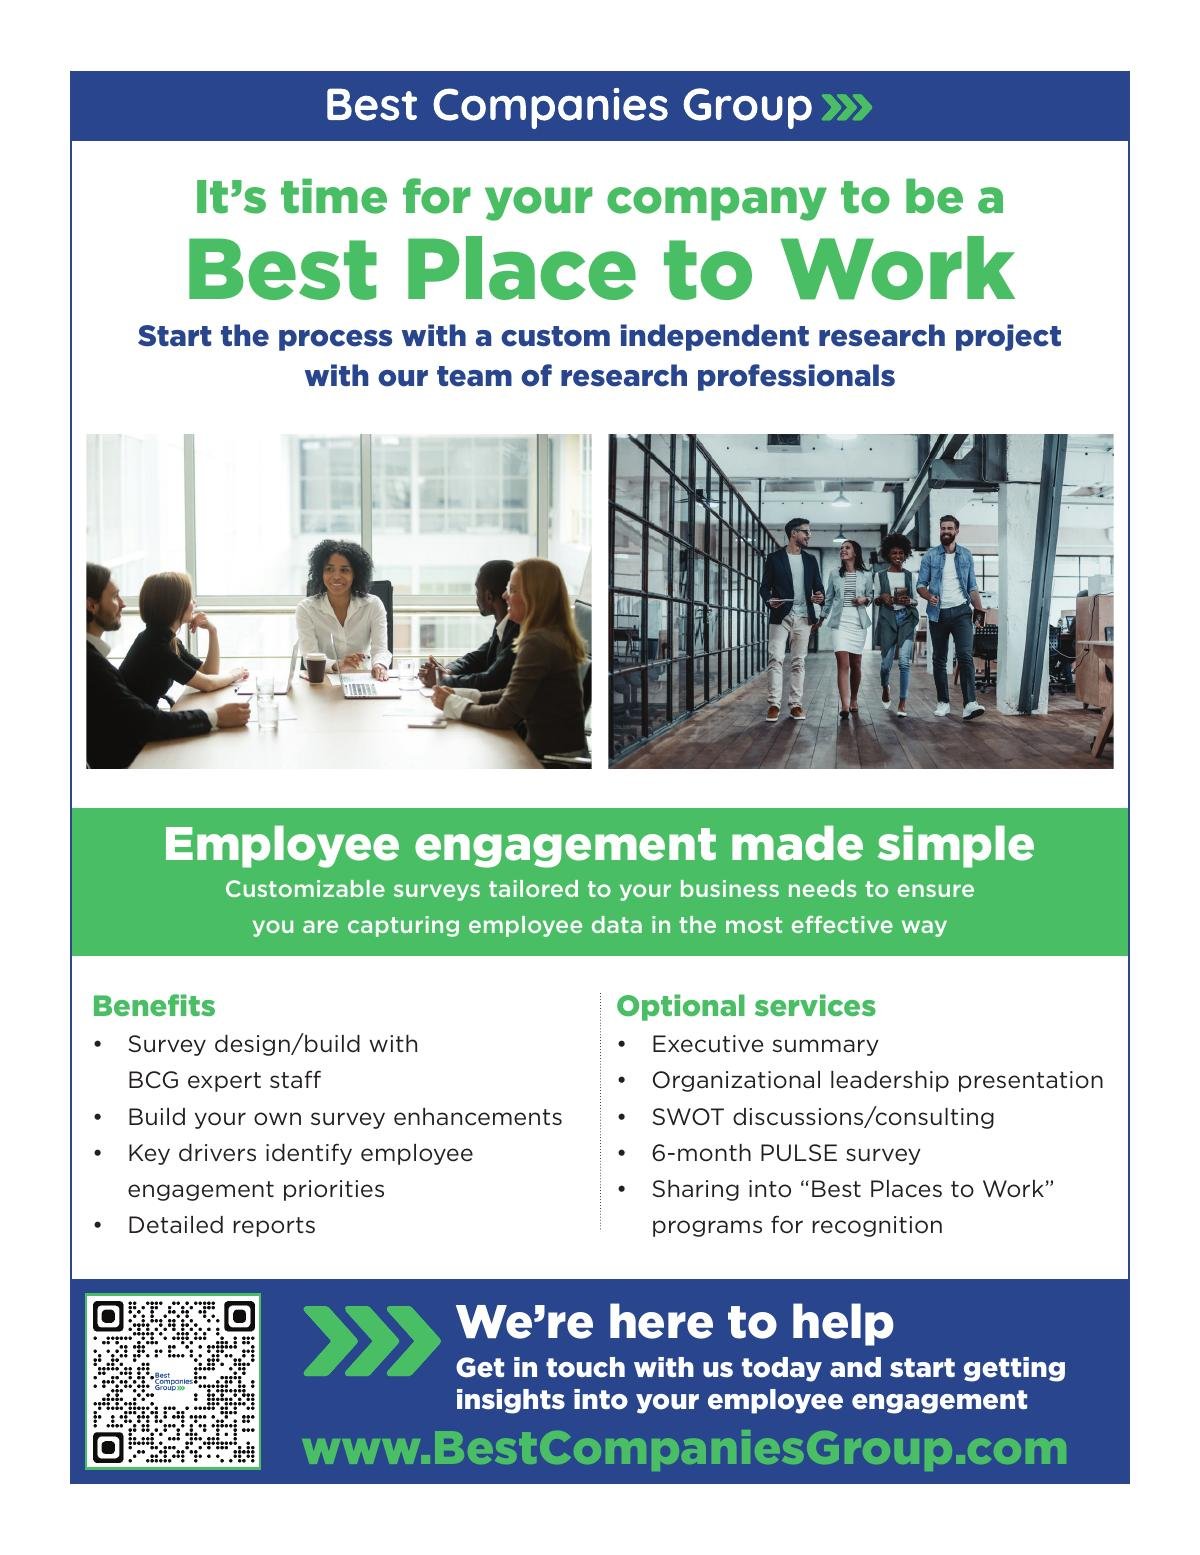 It’s time for your company to be a Best Place to Work